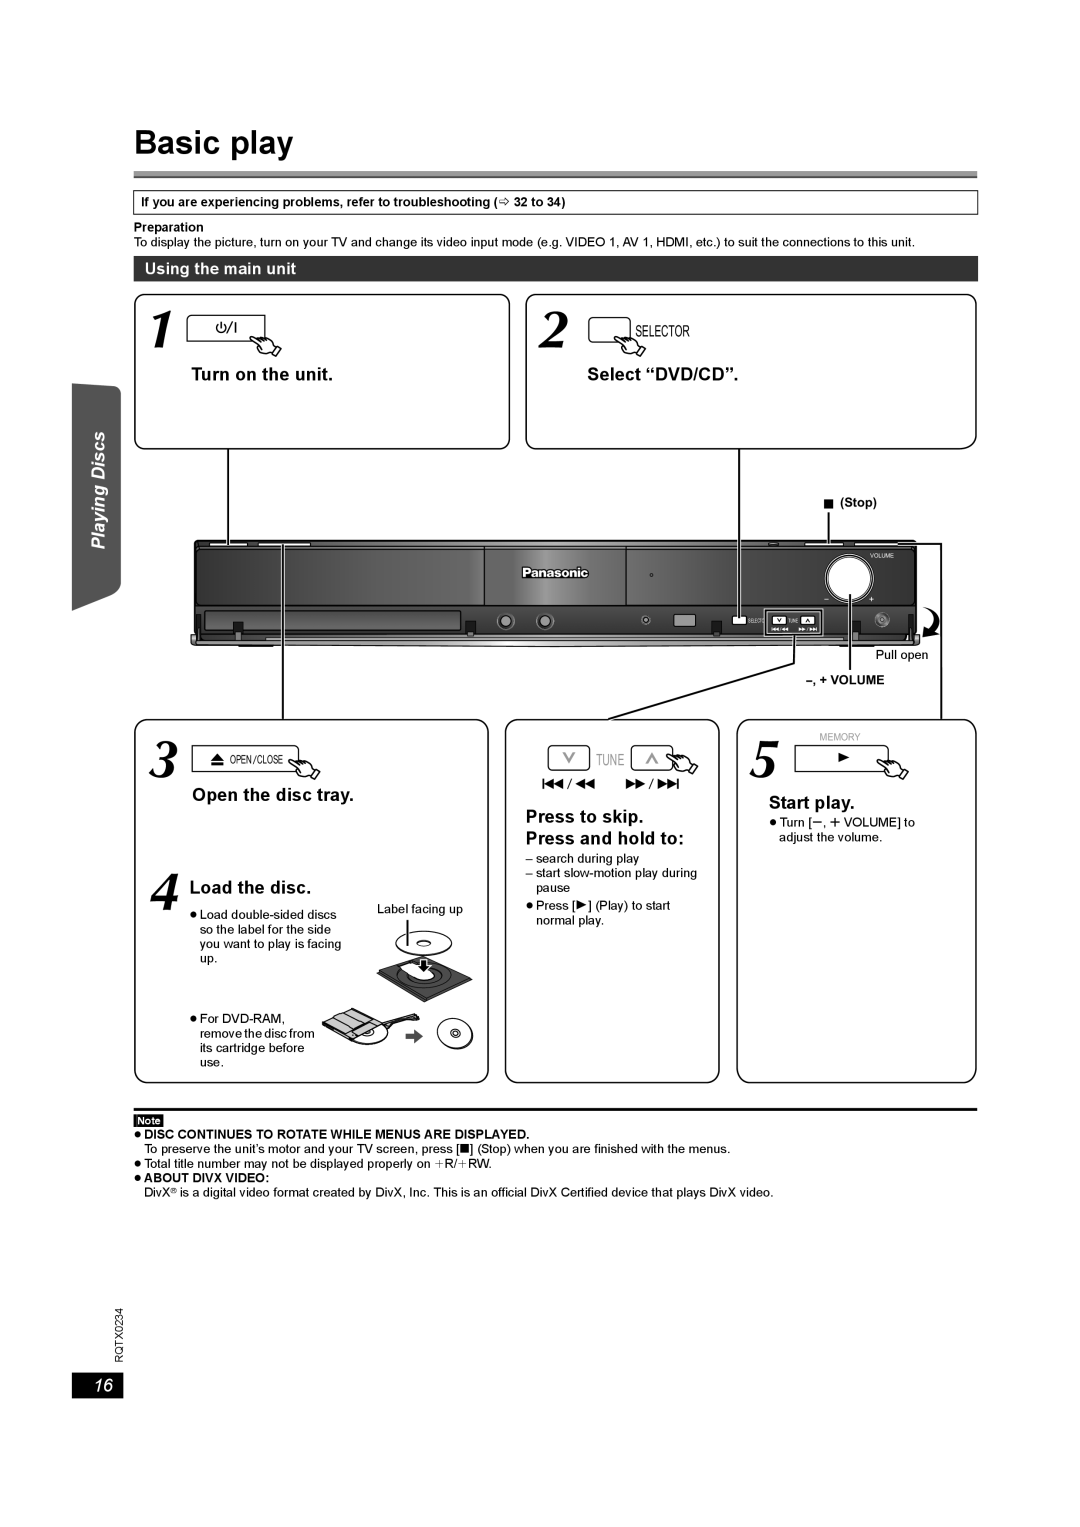 Panasonic SC-PT875 Basic play, Select “DVD/CD”, Other Reference, Open the disc tray, Press to skip, Press and hold to 